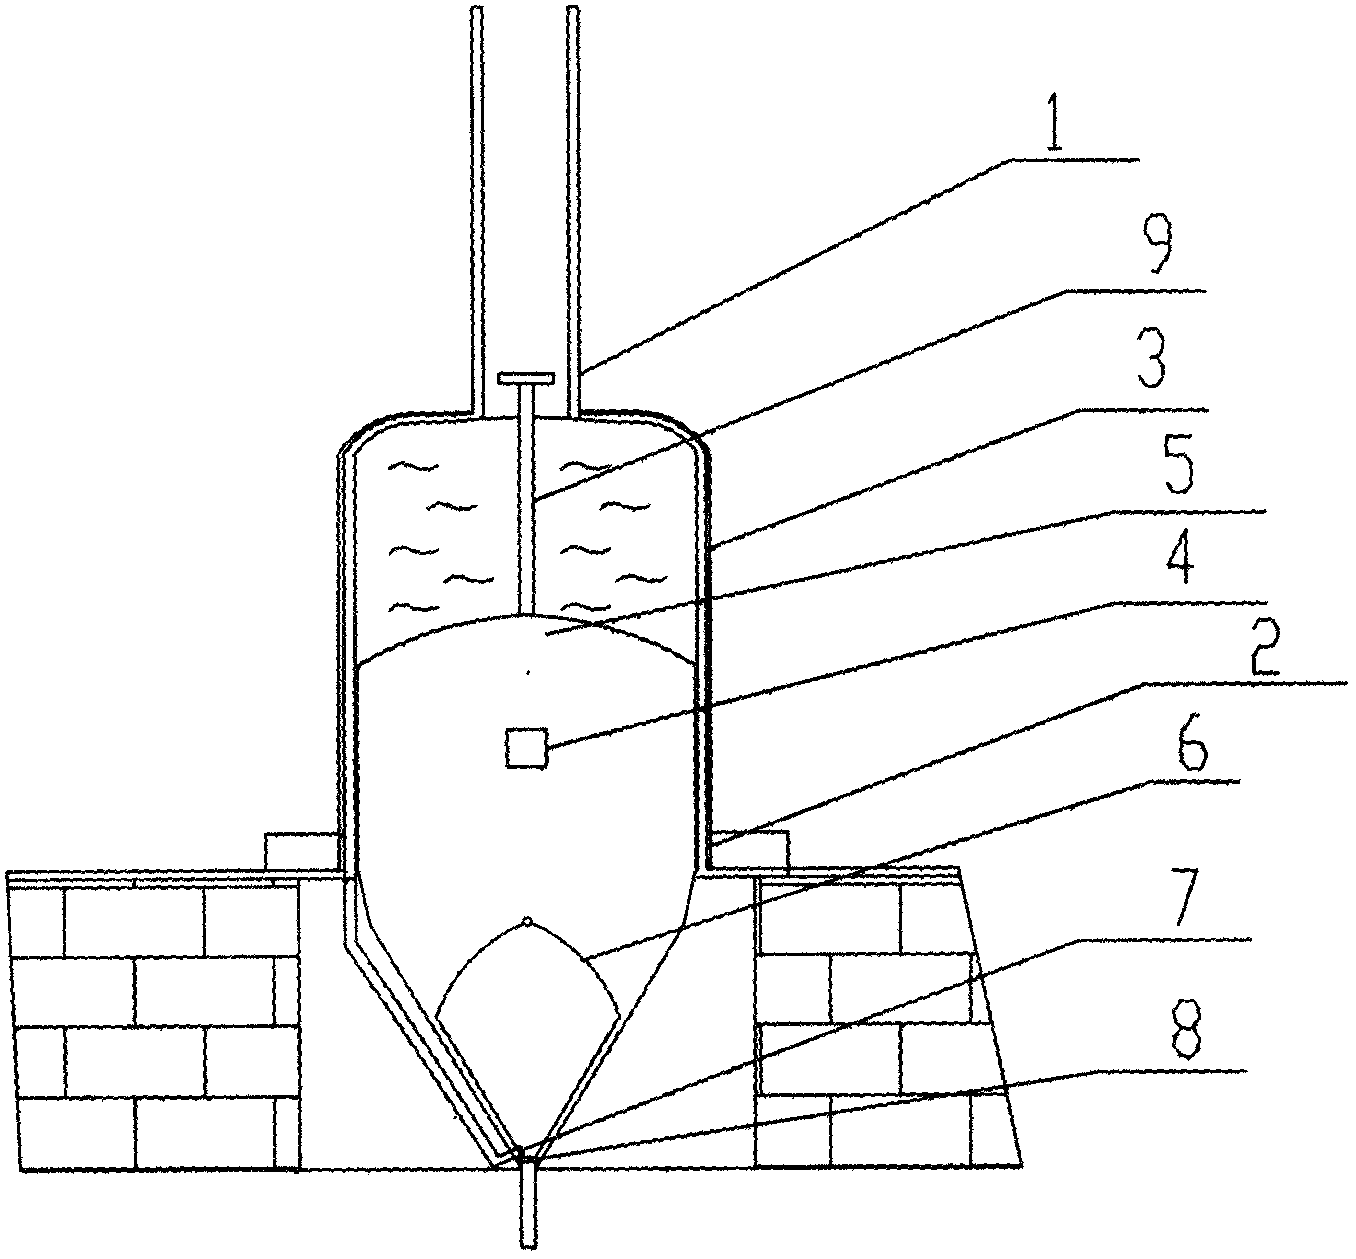 Automatically opened and closed flat-bottom valve gate